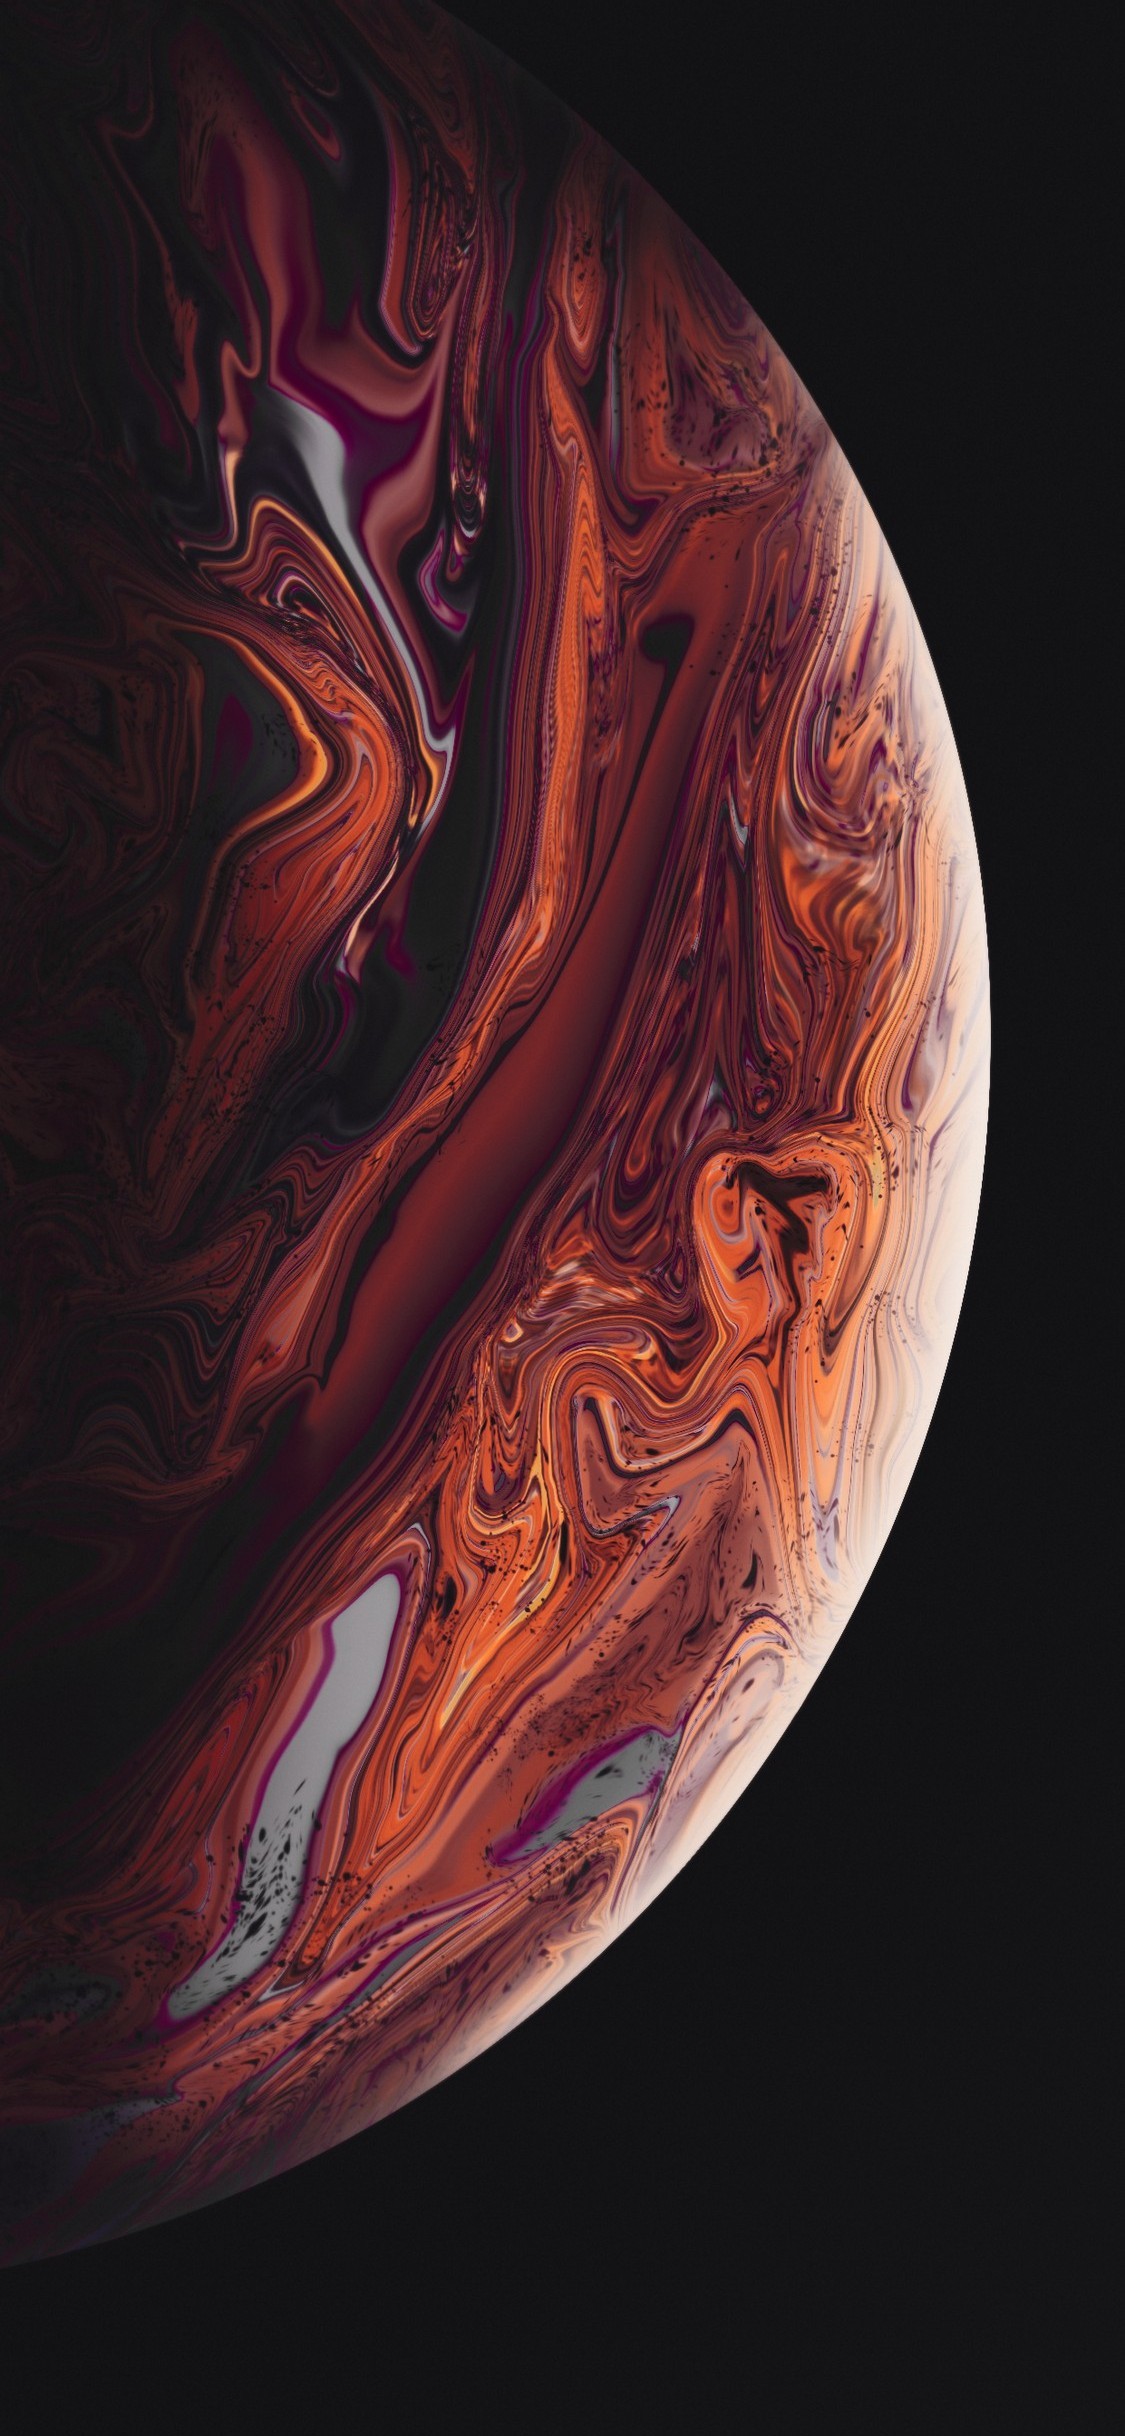 iPhone XS Wallpaper Size with high-resolution 1125x2436 pixel. Download all Mobile Wallpapers and Use them as wallpapers for your iPhone, Tablet, iPad, Android and other mobile devices